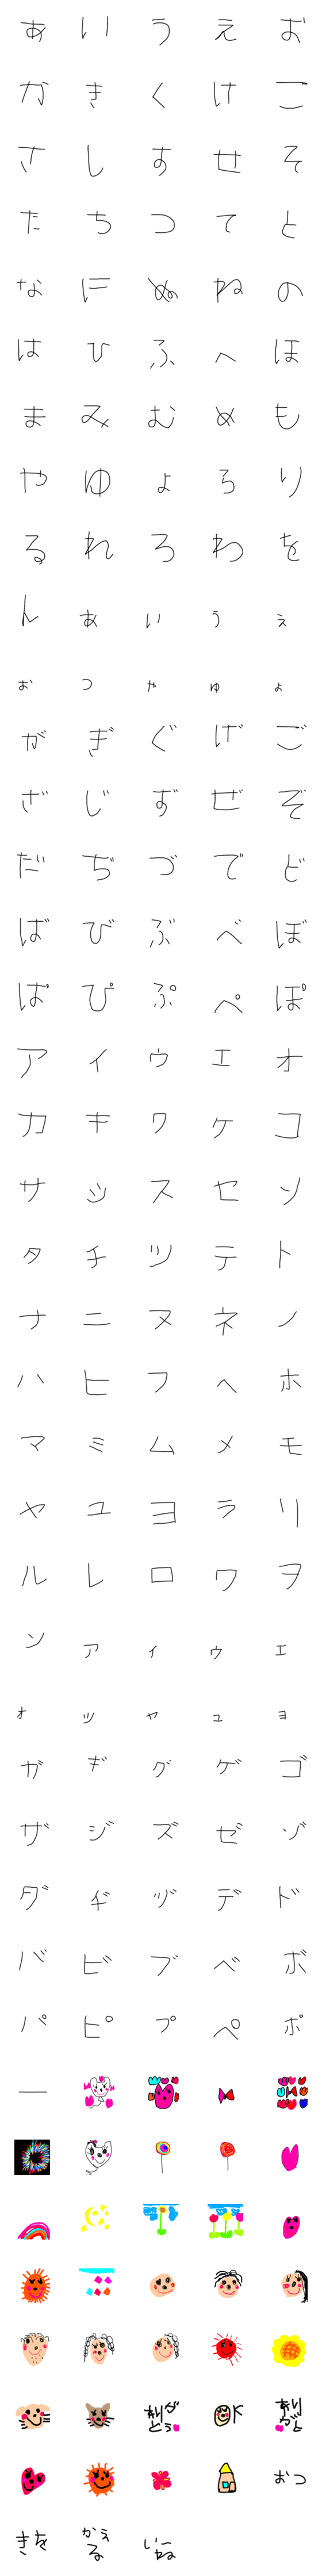 [LINE絵文字]4歳のyの絵文字の画像一覧